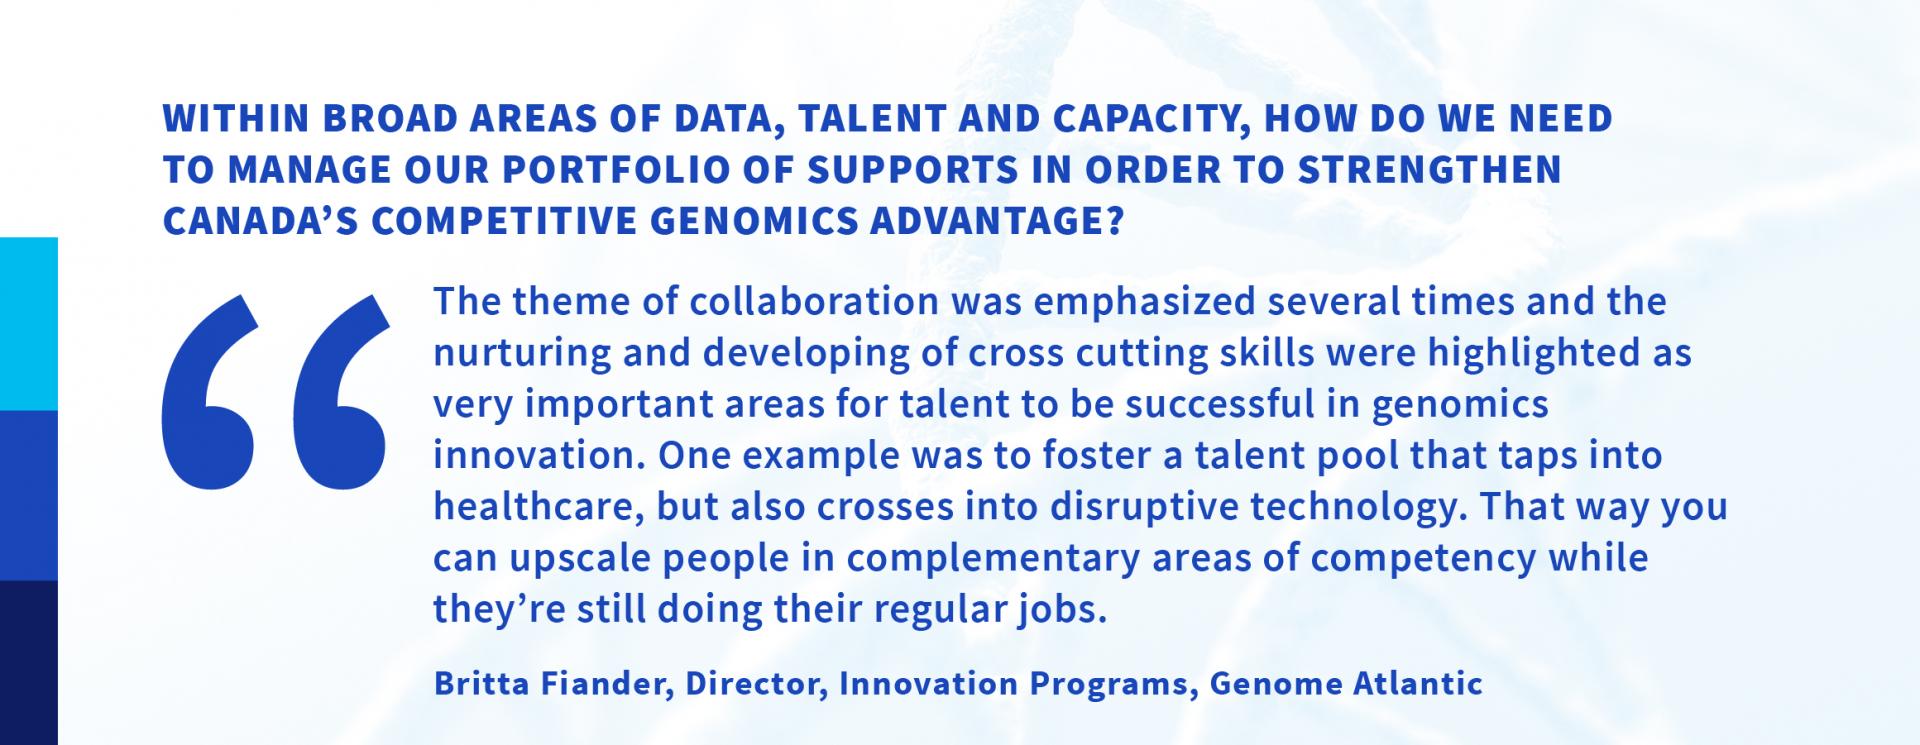 Within broad areas of data, talent and capacity, how do we need to manage our portfolio of supports in order to strengthen Canada’s competitive genomics advantage? “The theme of collaboration was emphasized several times and the nurturing and developing of cross cutting skills were highlighted as very important areas for talent to be successful in genomics innovation. One example was to foster a talent pool that taps into healthcare, but also crosses into disruptive technology. That way you can upscale people in complementary areas of competency while they’re still doing their regular jobs.”—Britta Fiander, Director, Innovation Programs, Genome Atlantic 